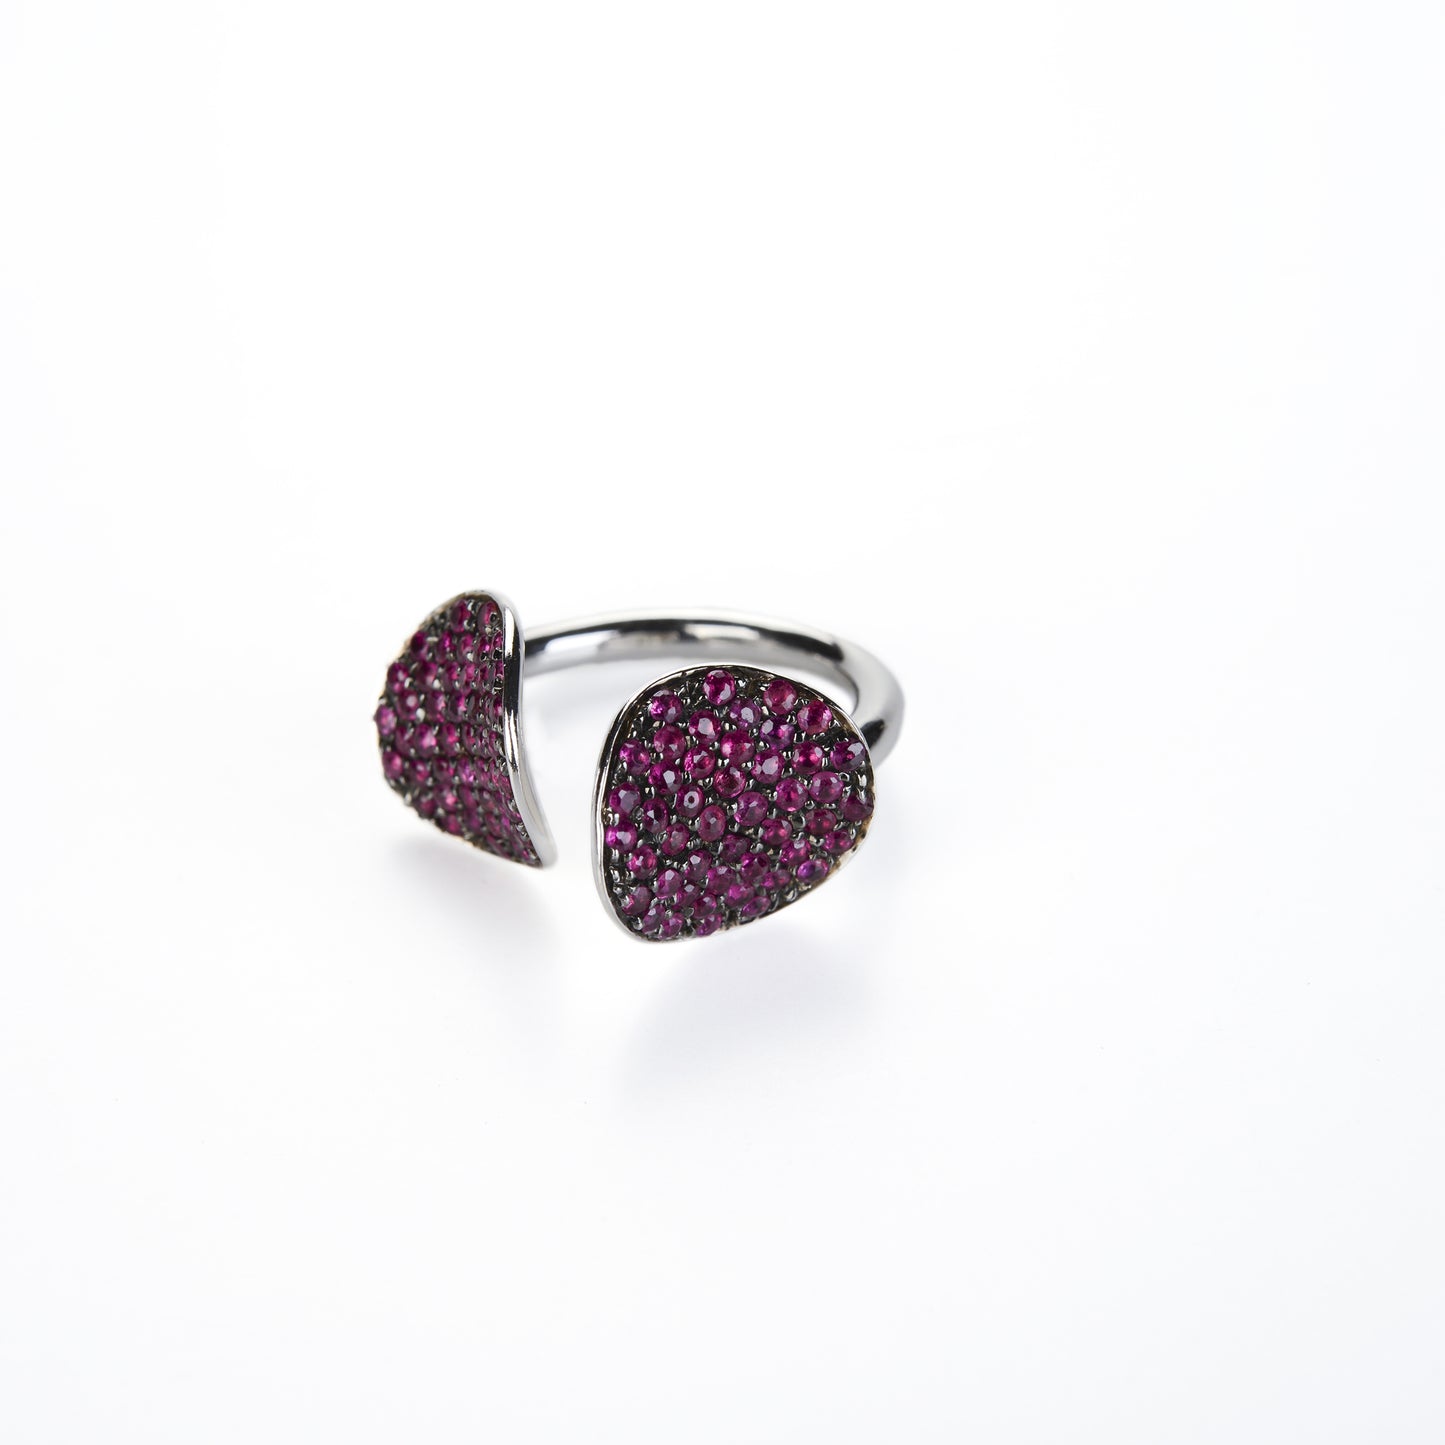 Open cuff ring in white gold and rubies